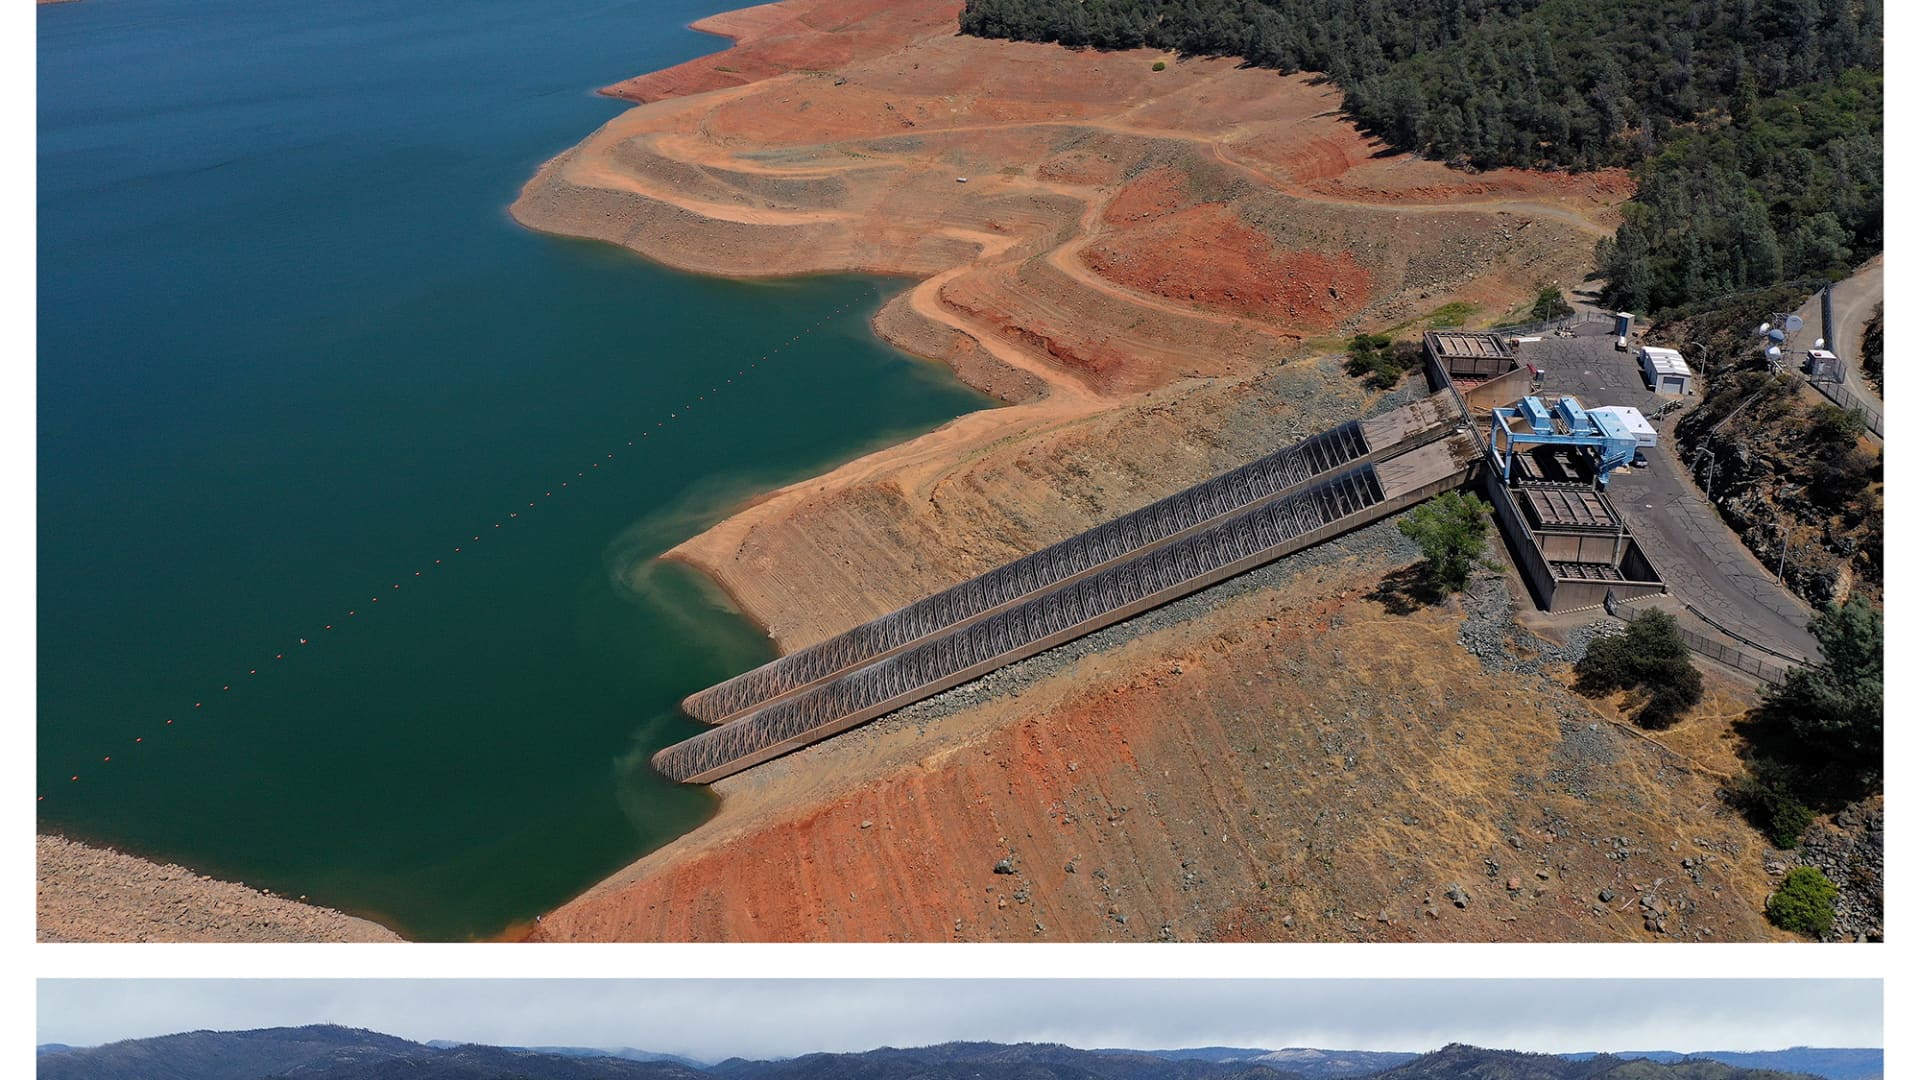 The top image, taken on July 22, 2021, is an aerial view shot that shows visible intake gates at the Edward Hyatt Power Plant intake facility at Lake Oroville. The bottom image was taken on Feb. 14, 2023 after torrential rain prompted the lake to fill with water.